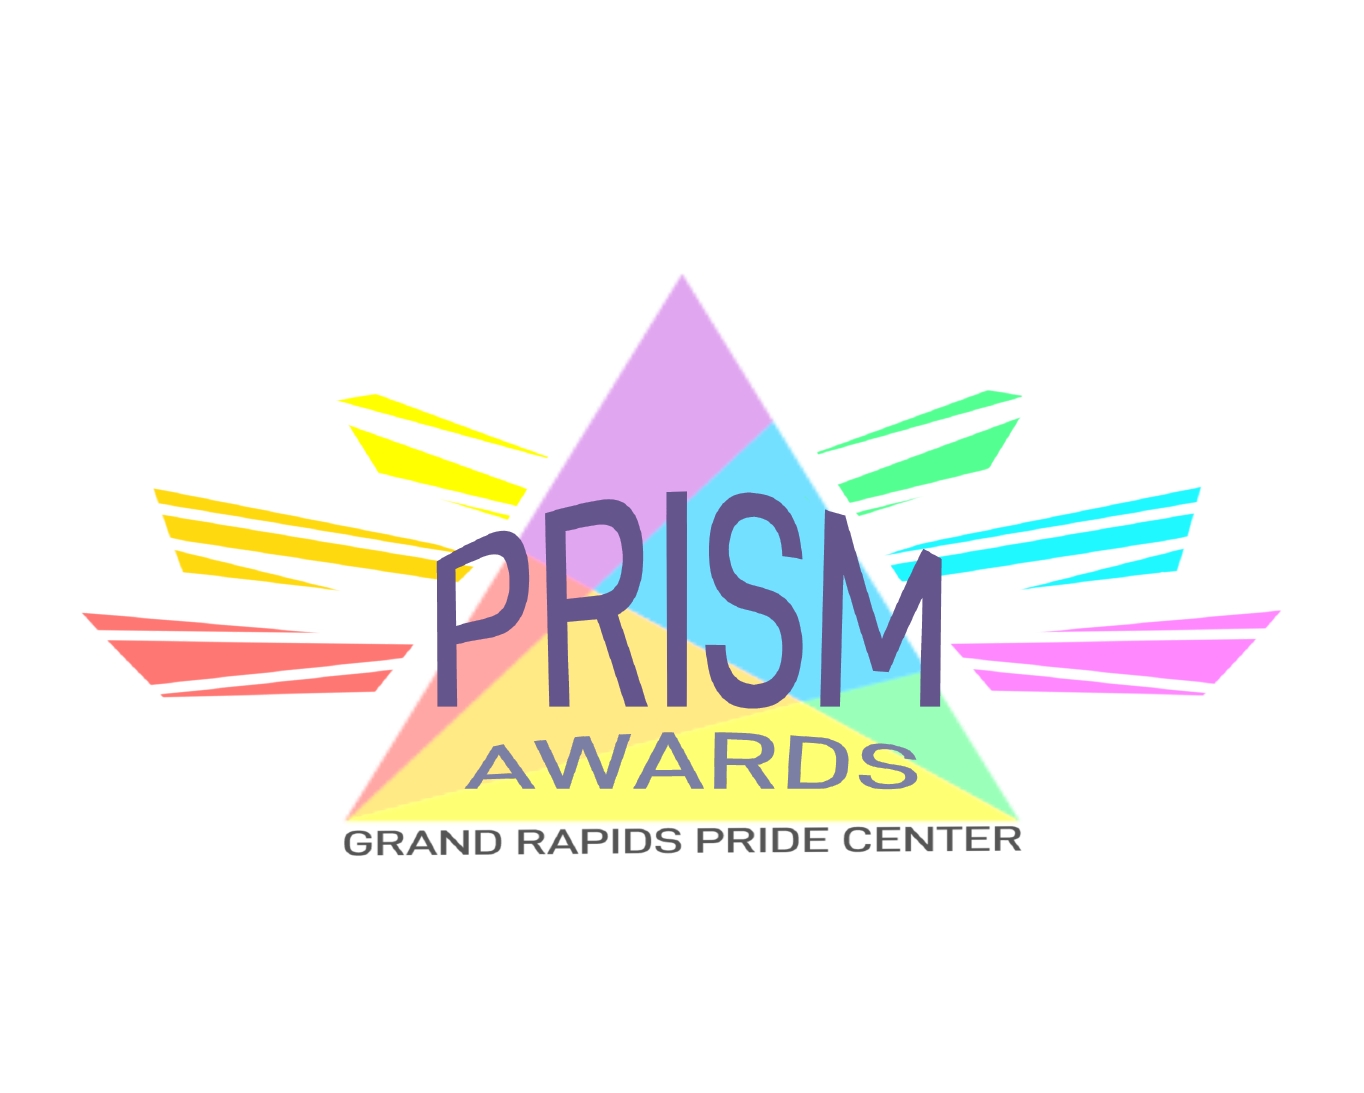 Prism Awards cover image